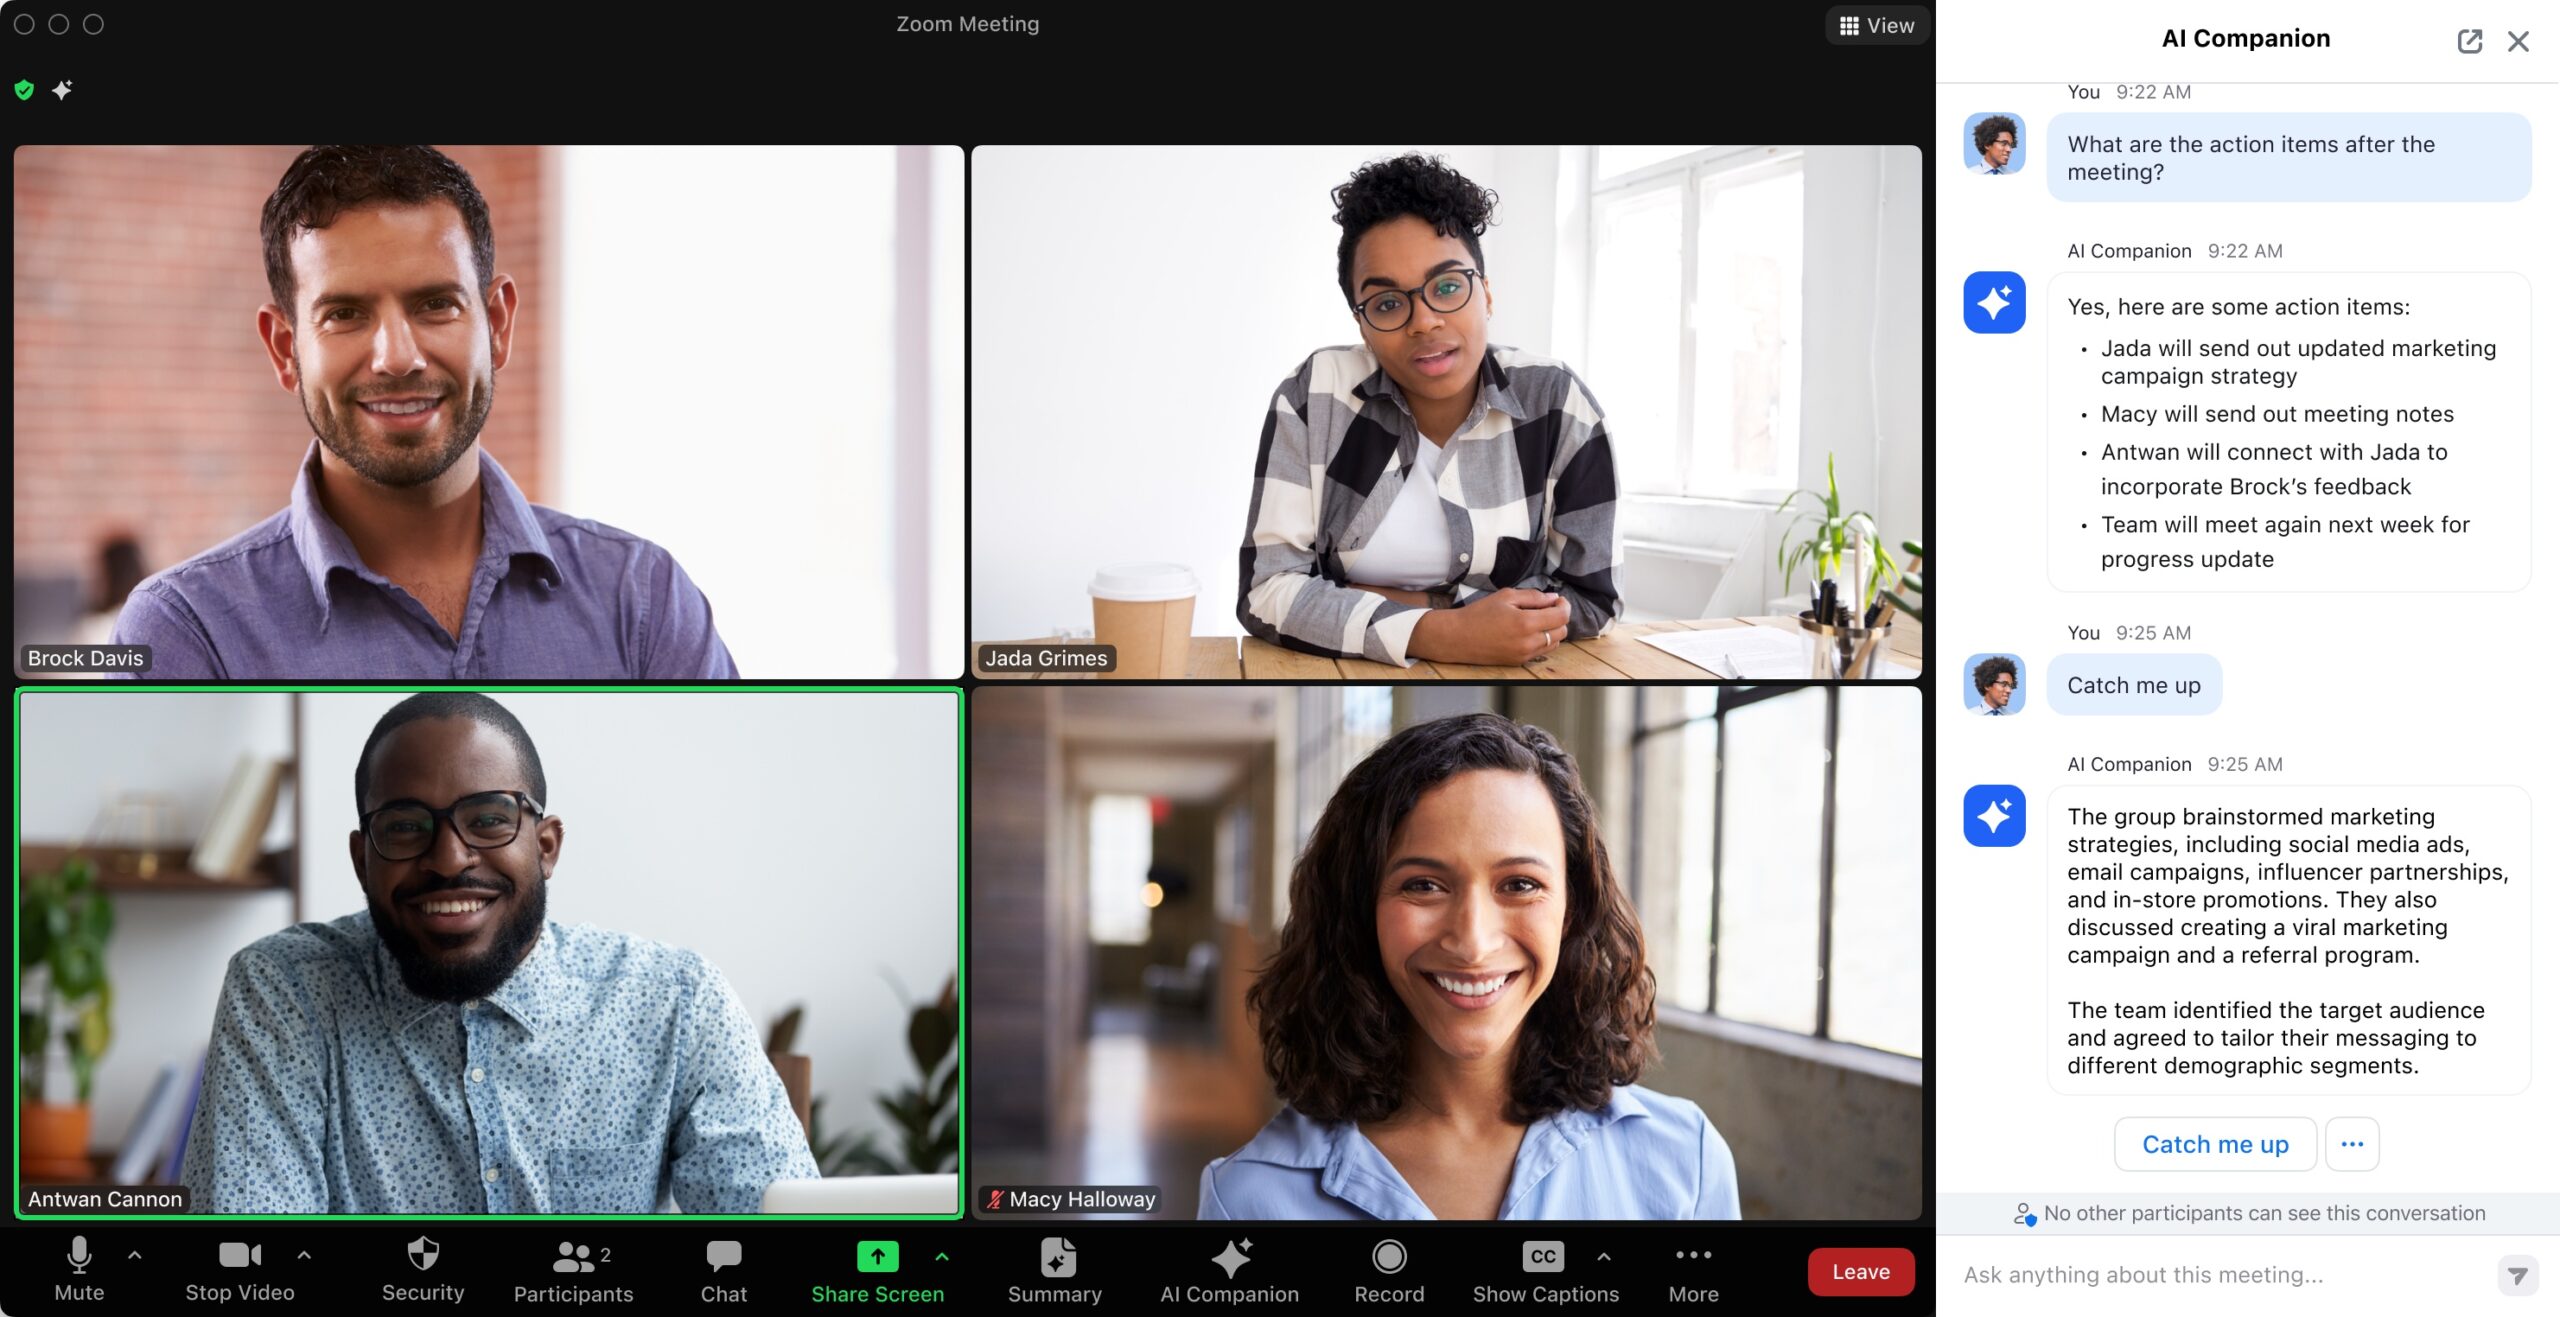 Zoom AI Companion in action during meetings and workdays